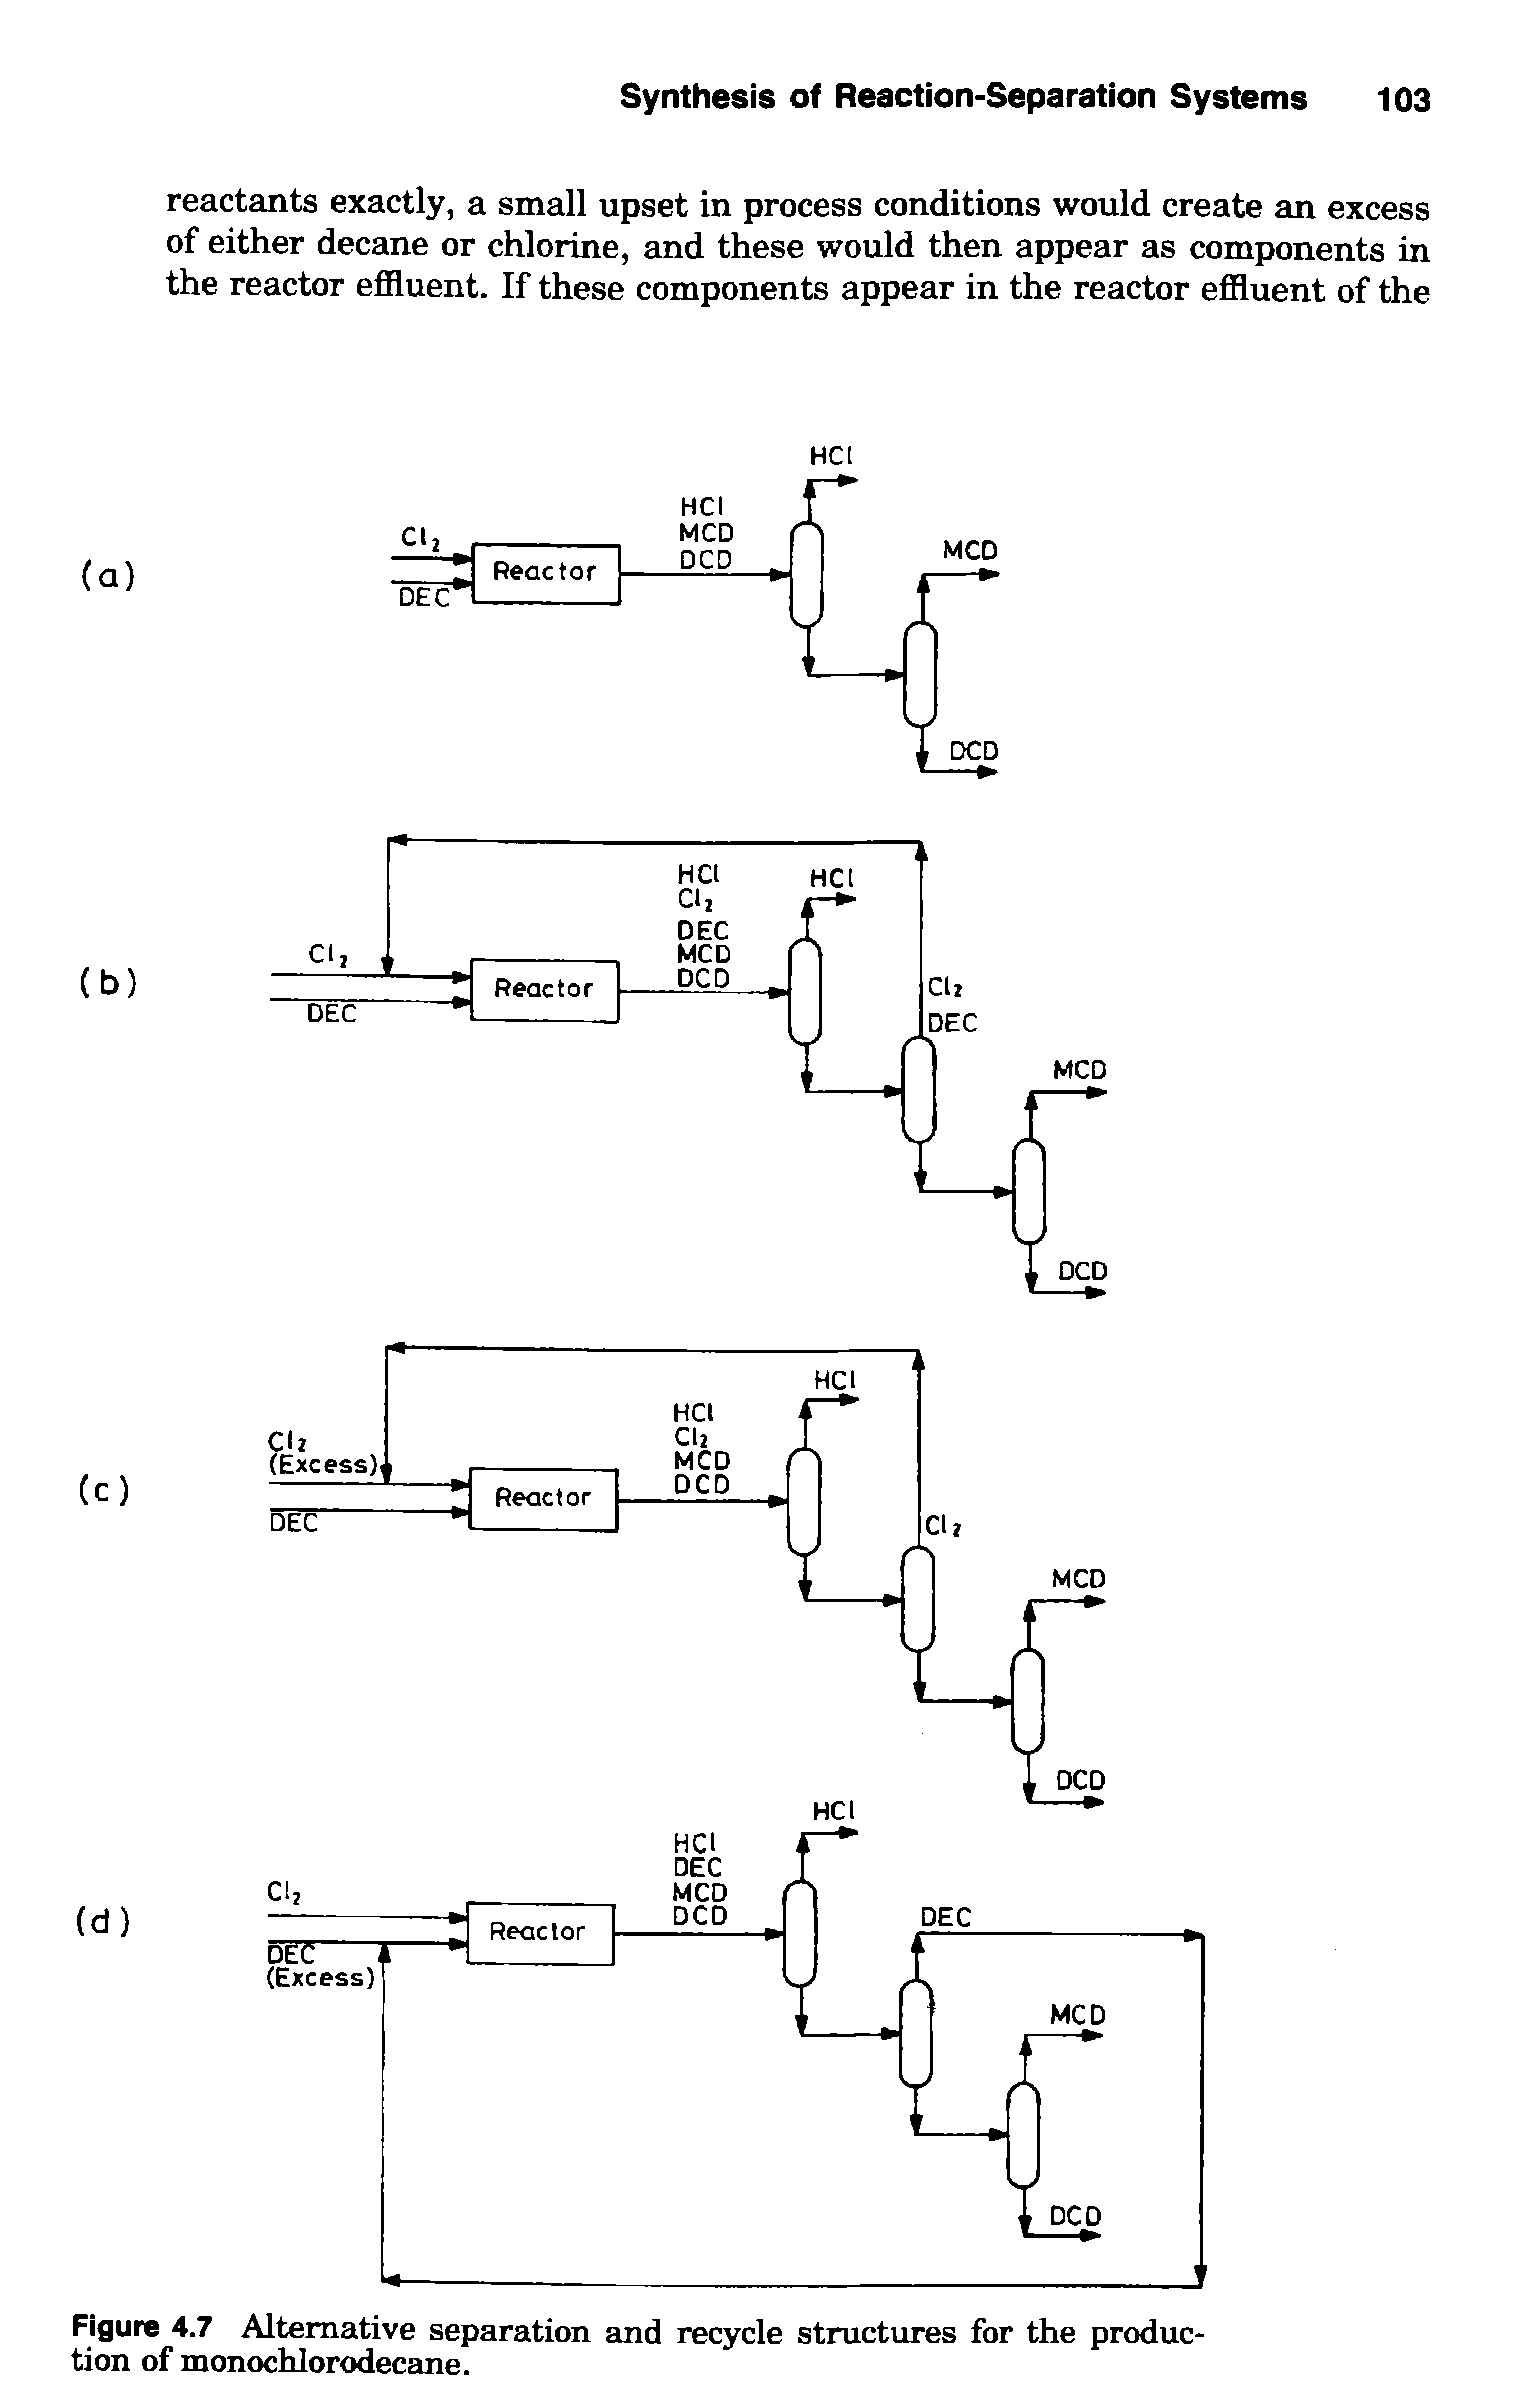 Figure 4.7 Alternative separation and recycle structures for the production of monochlorodecane.